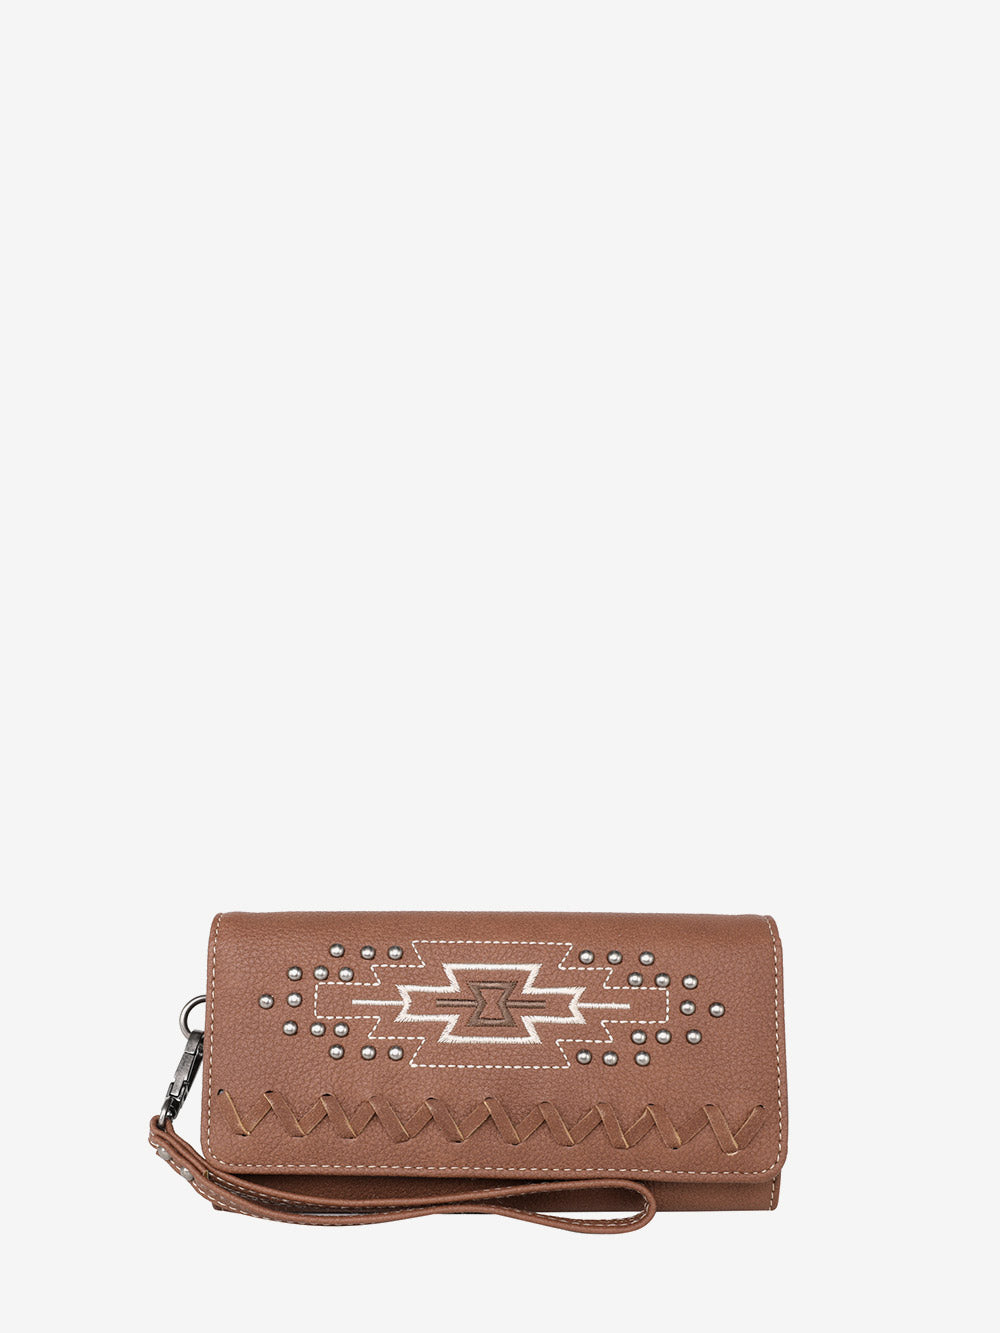 Montana West Aztec Embroidery Wallet